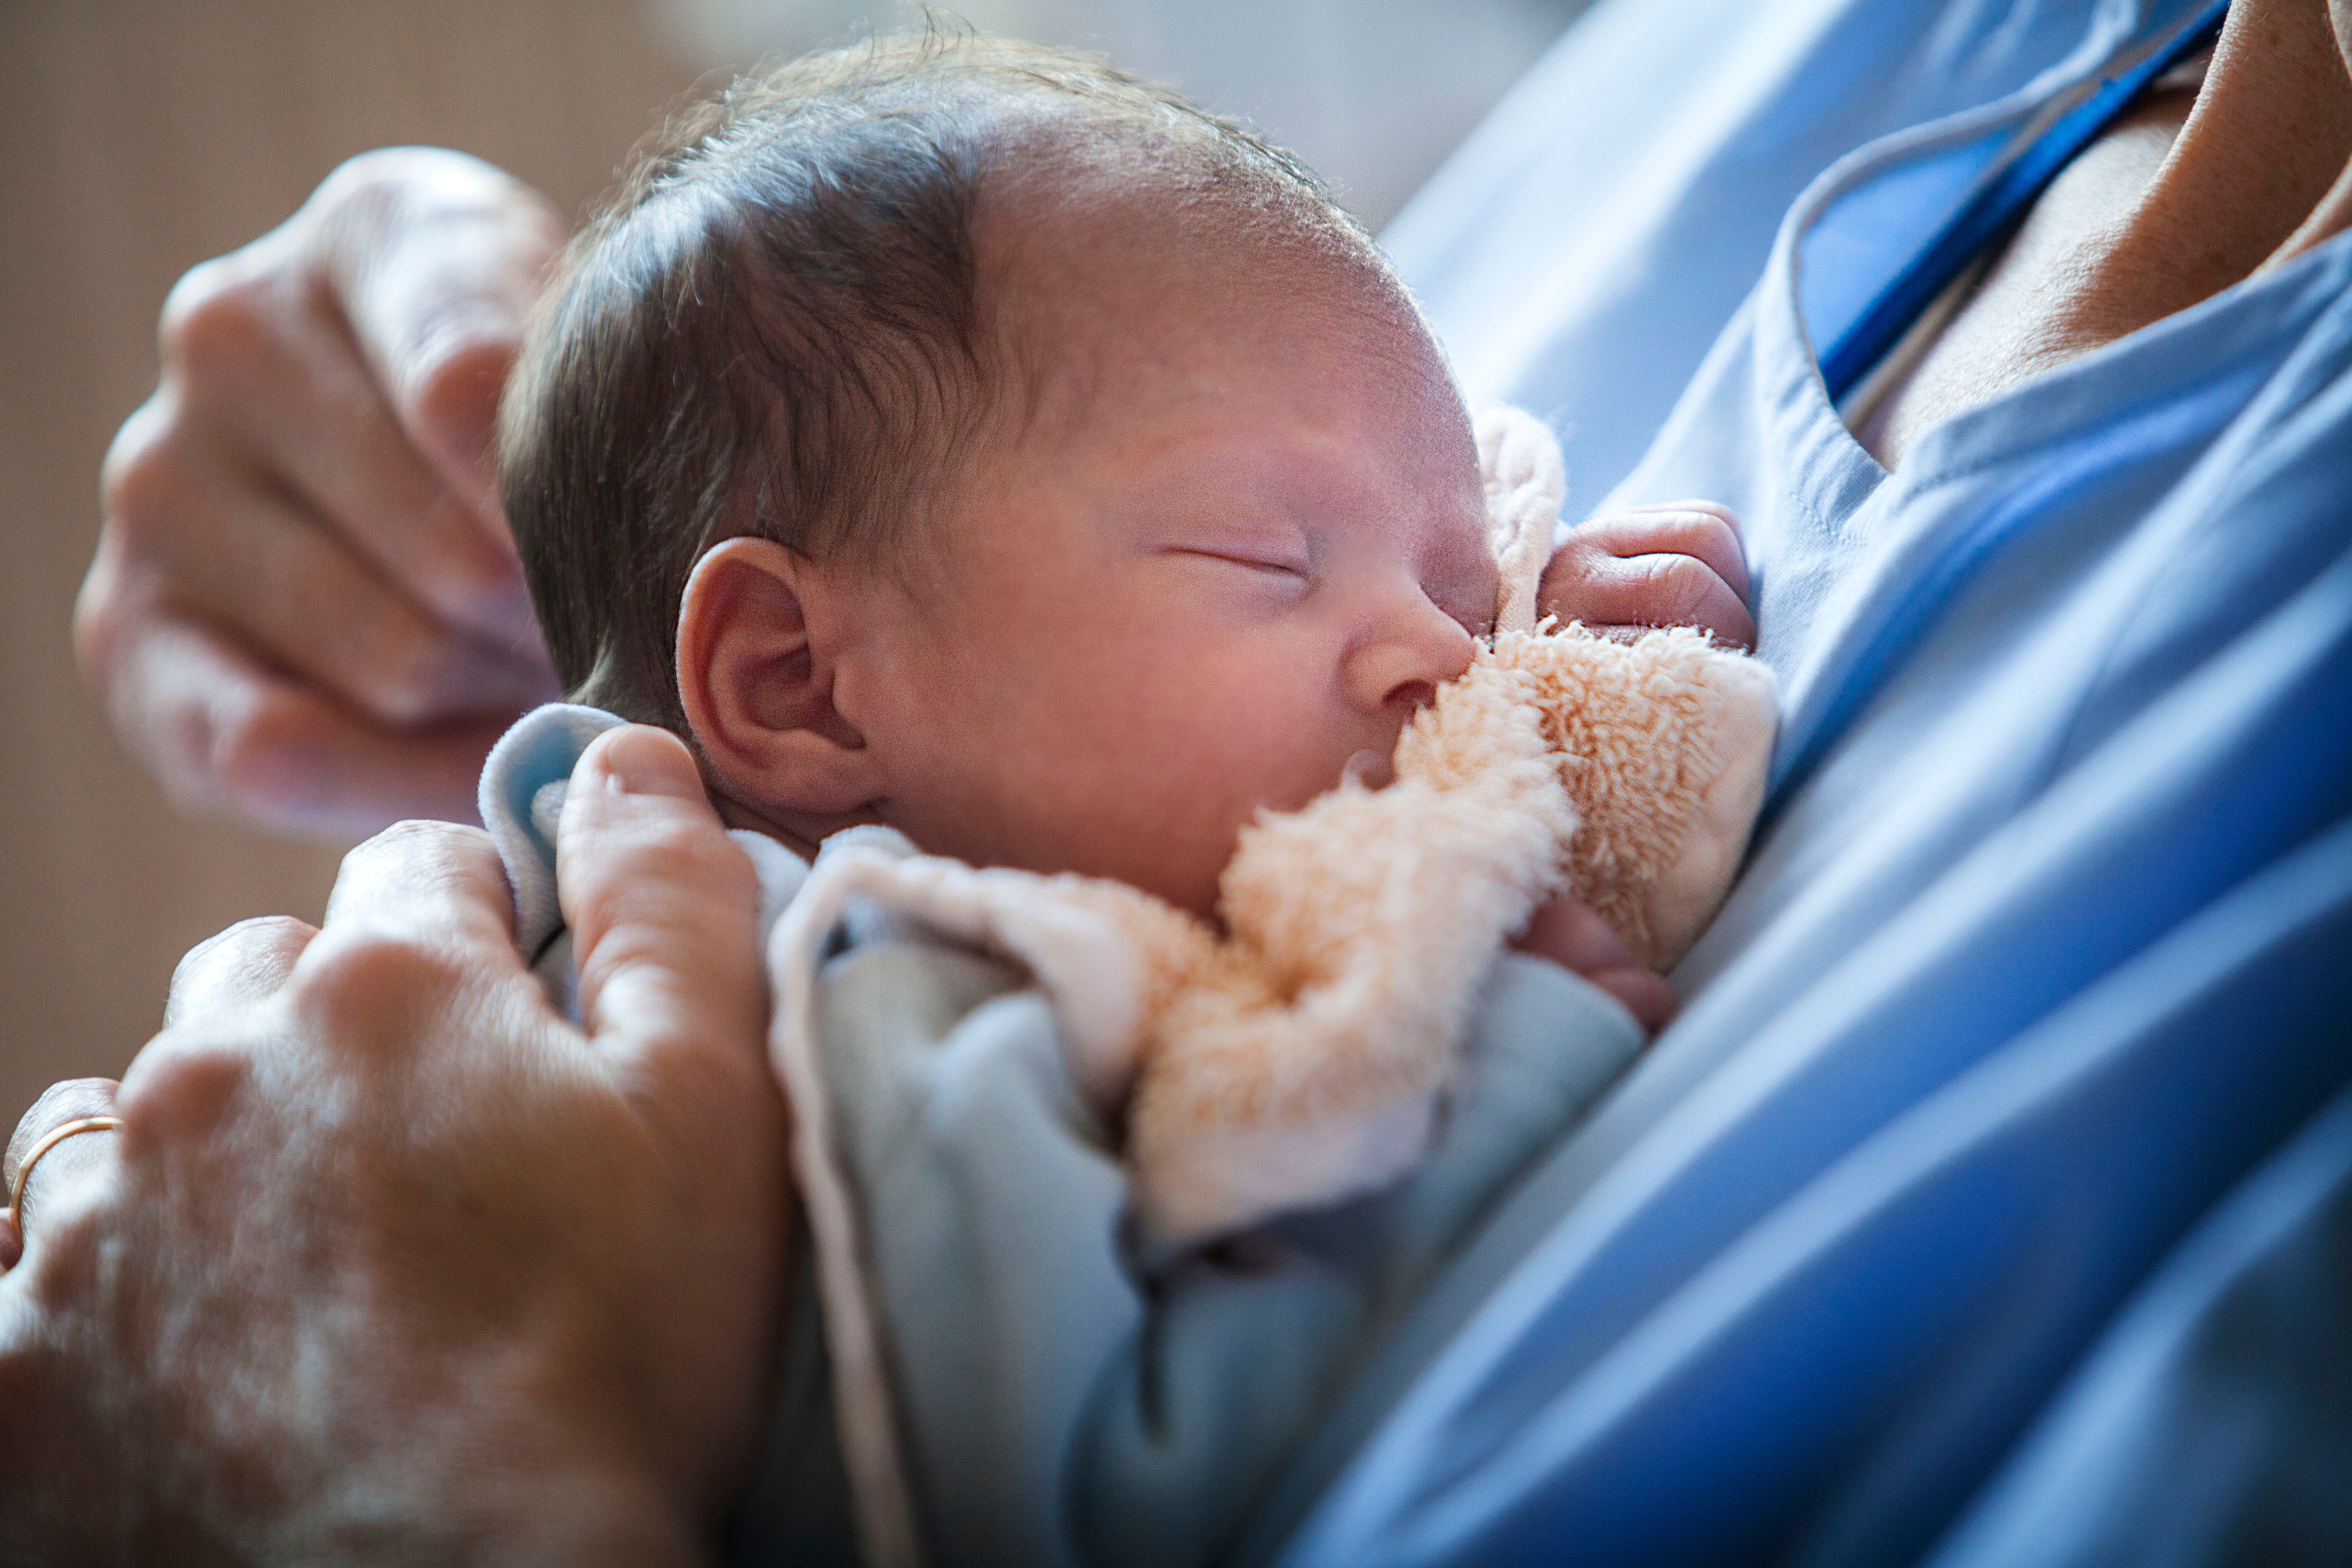 Just too soon: A preemie in a neonatology unit in Haute-Savoie, France. ((BSIP &amp; UIG via Getty Images))